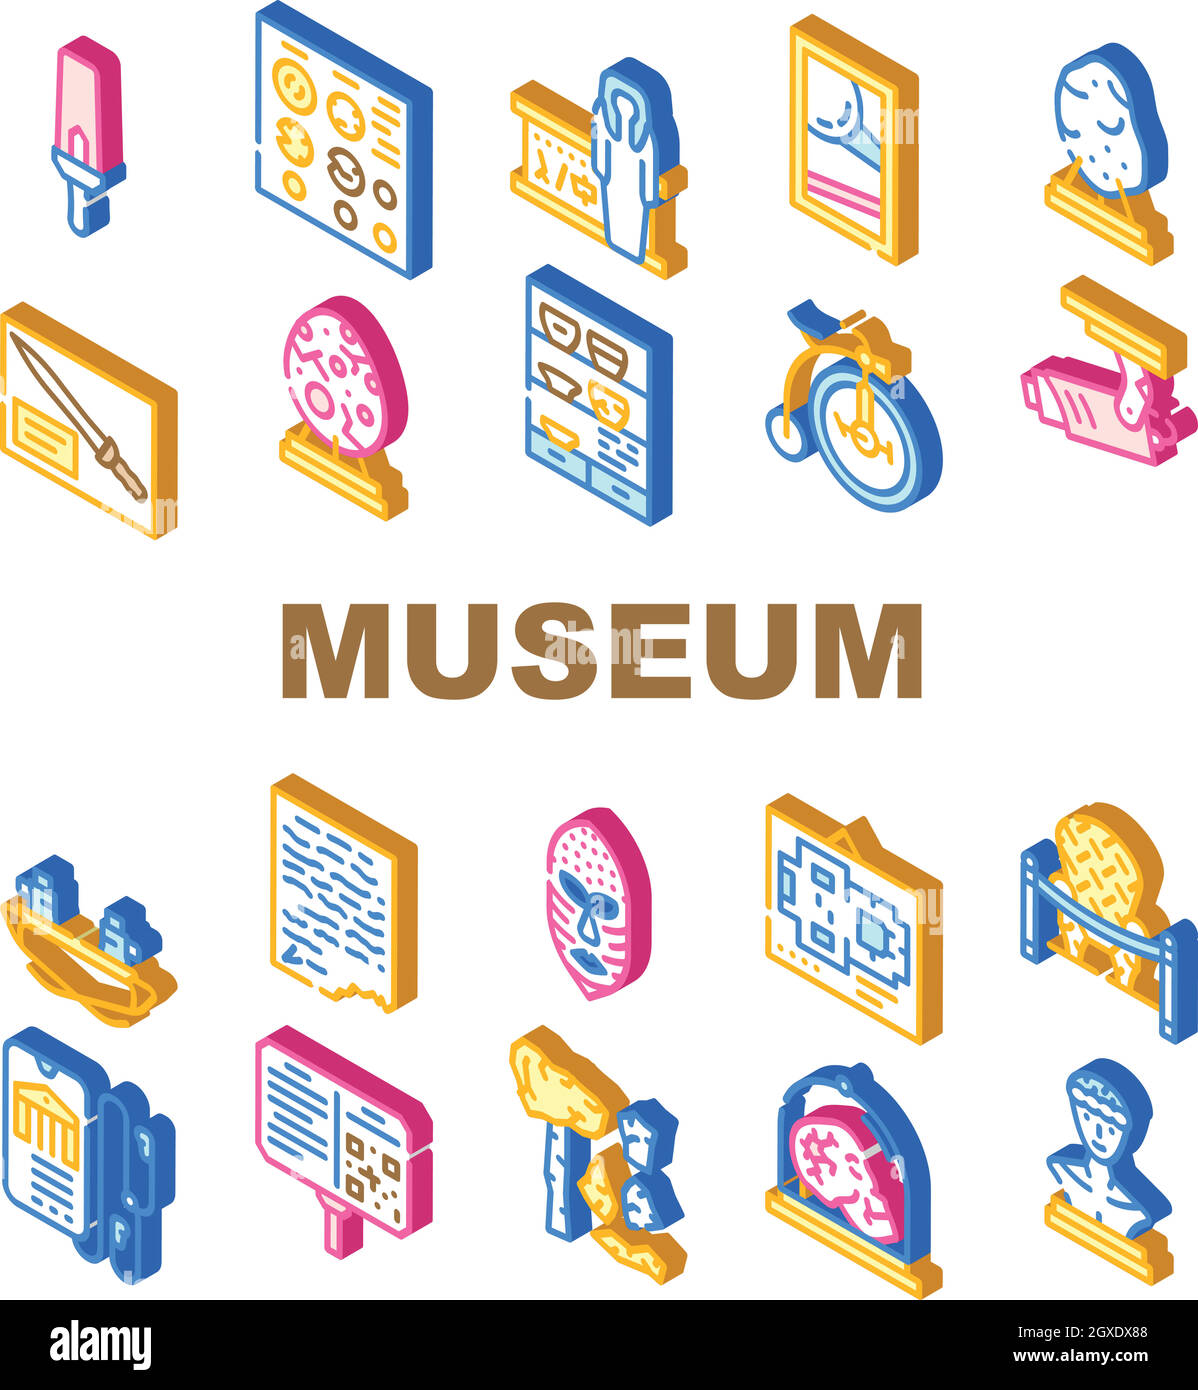 Museum Exhibits And Excursion Icons Set Vector Stock Vector